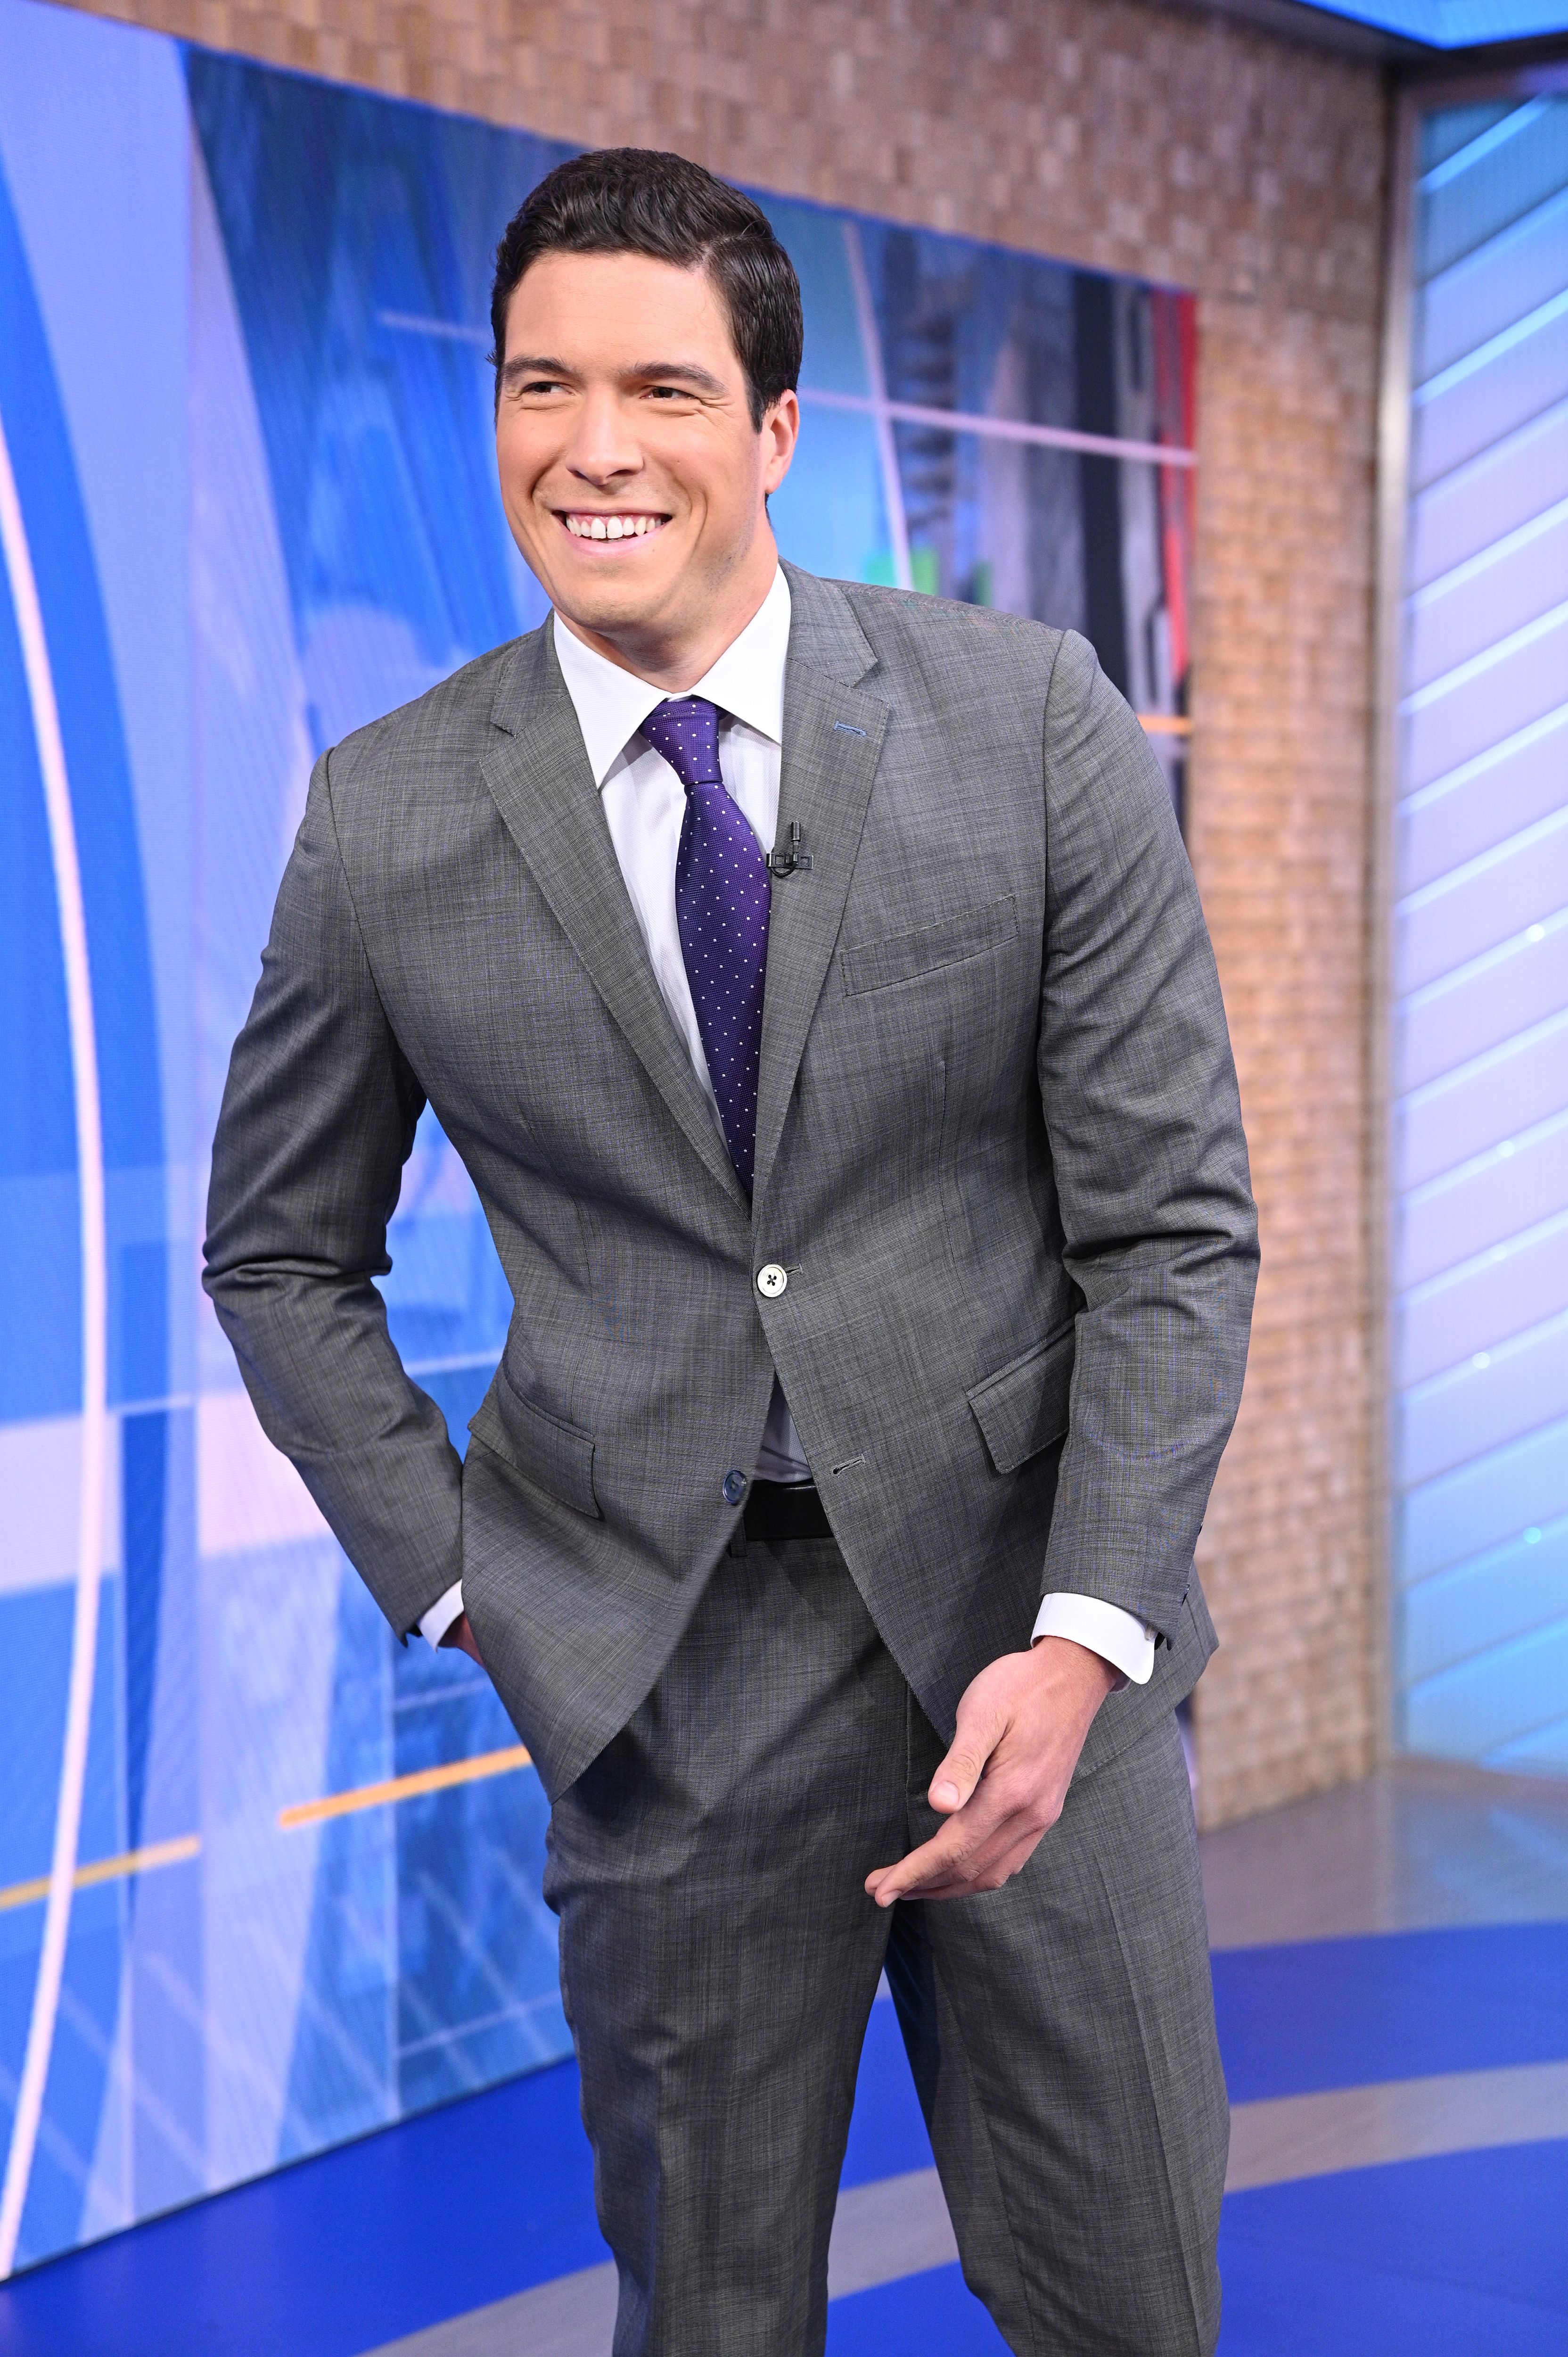 Will Reeve on ABC's "Good Morning America" on January 17, 2020. | Source: Getty Images